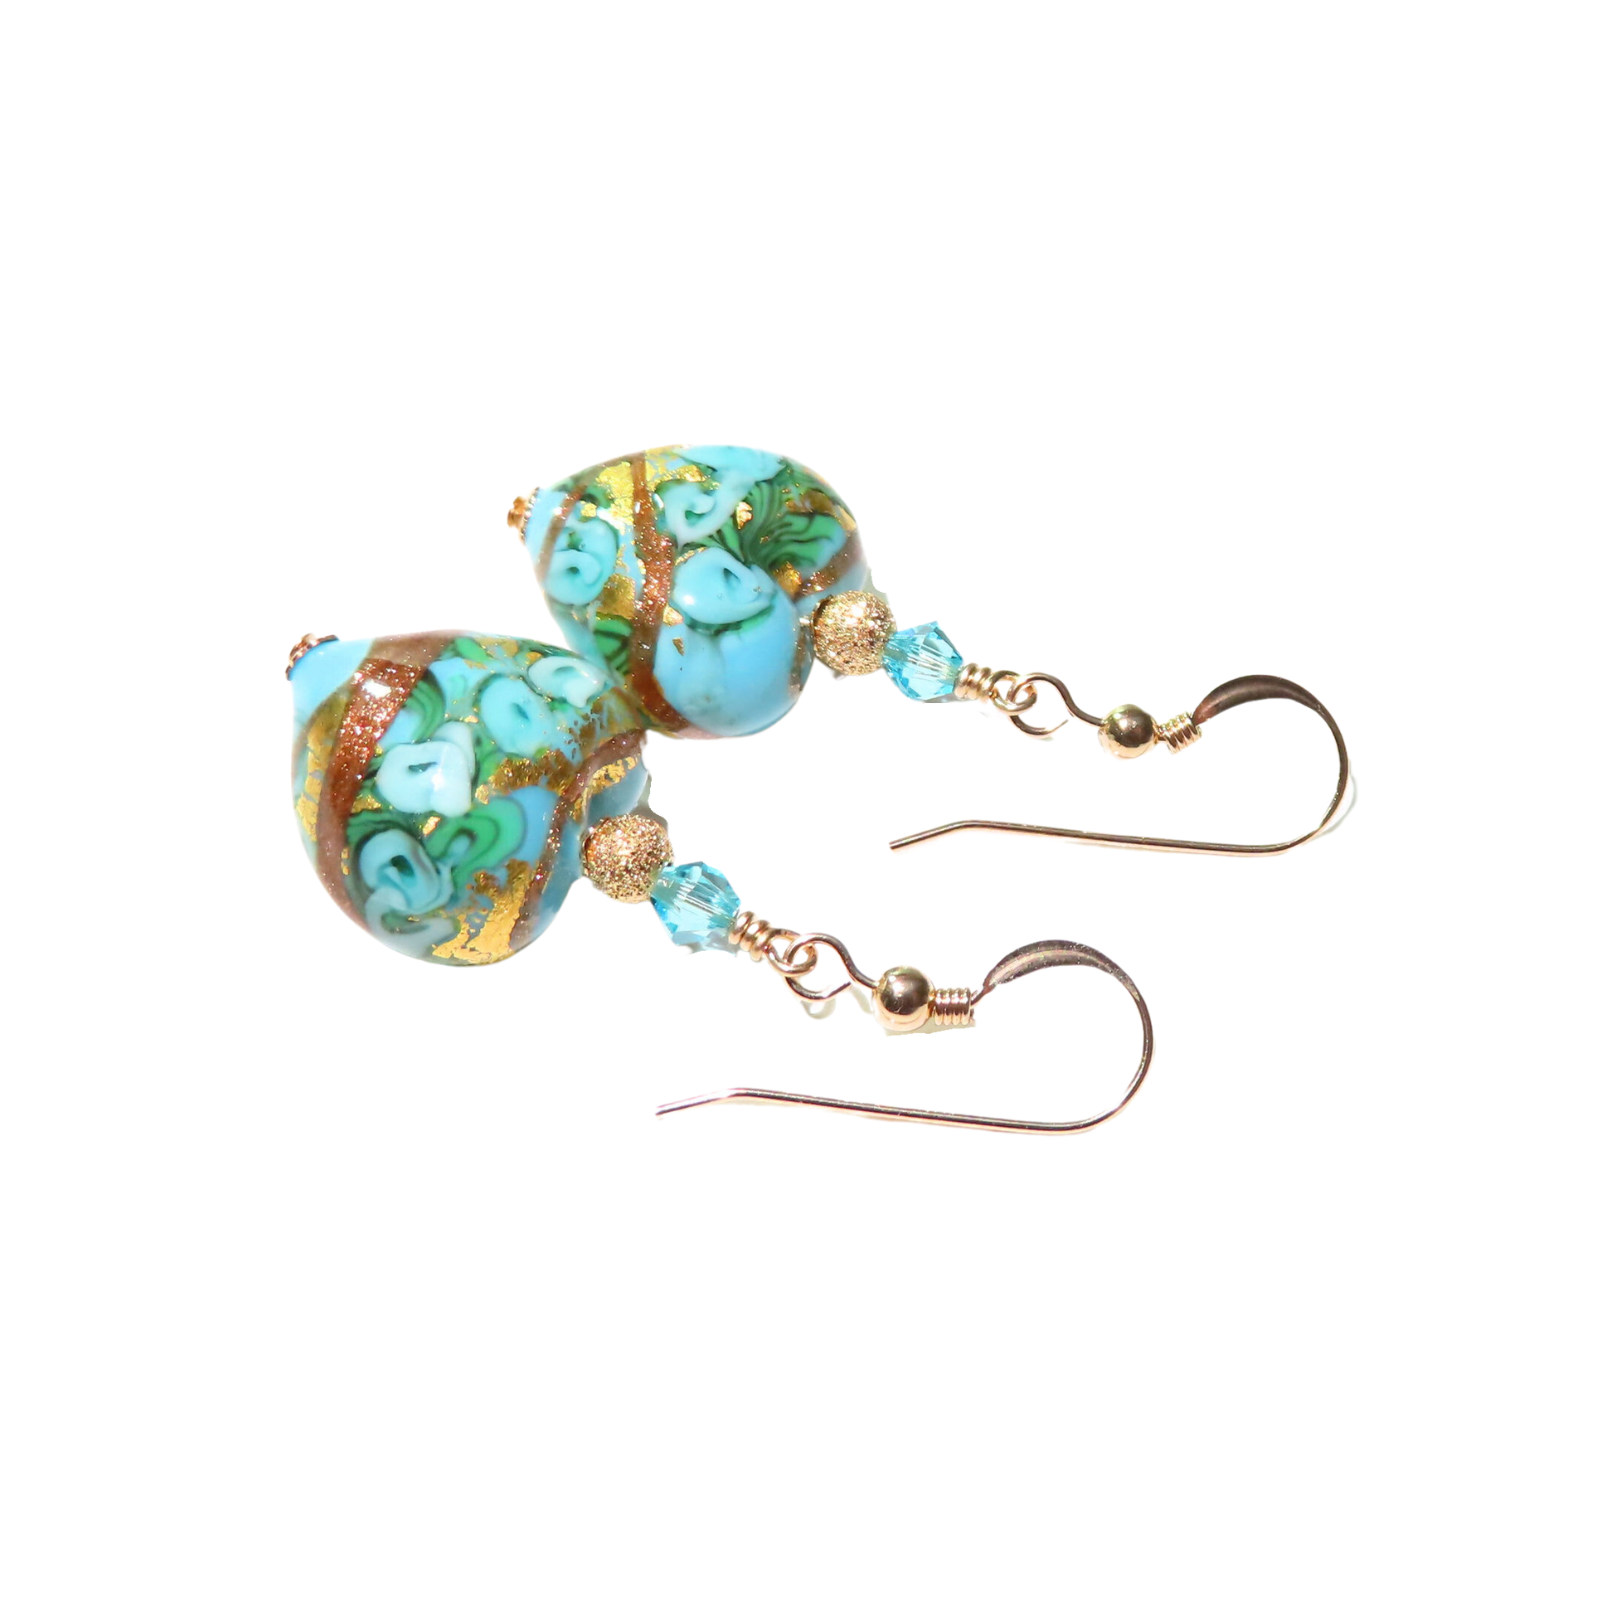 a pair of earrings with blue and green beads